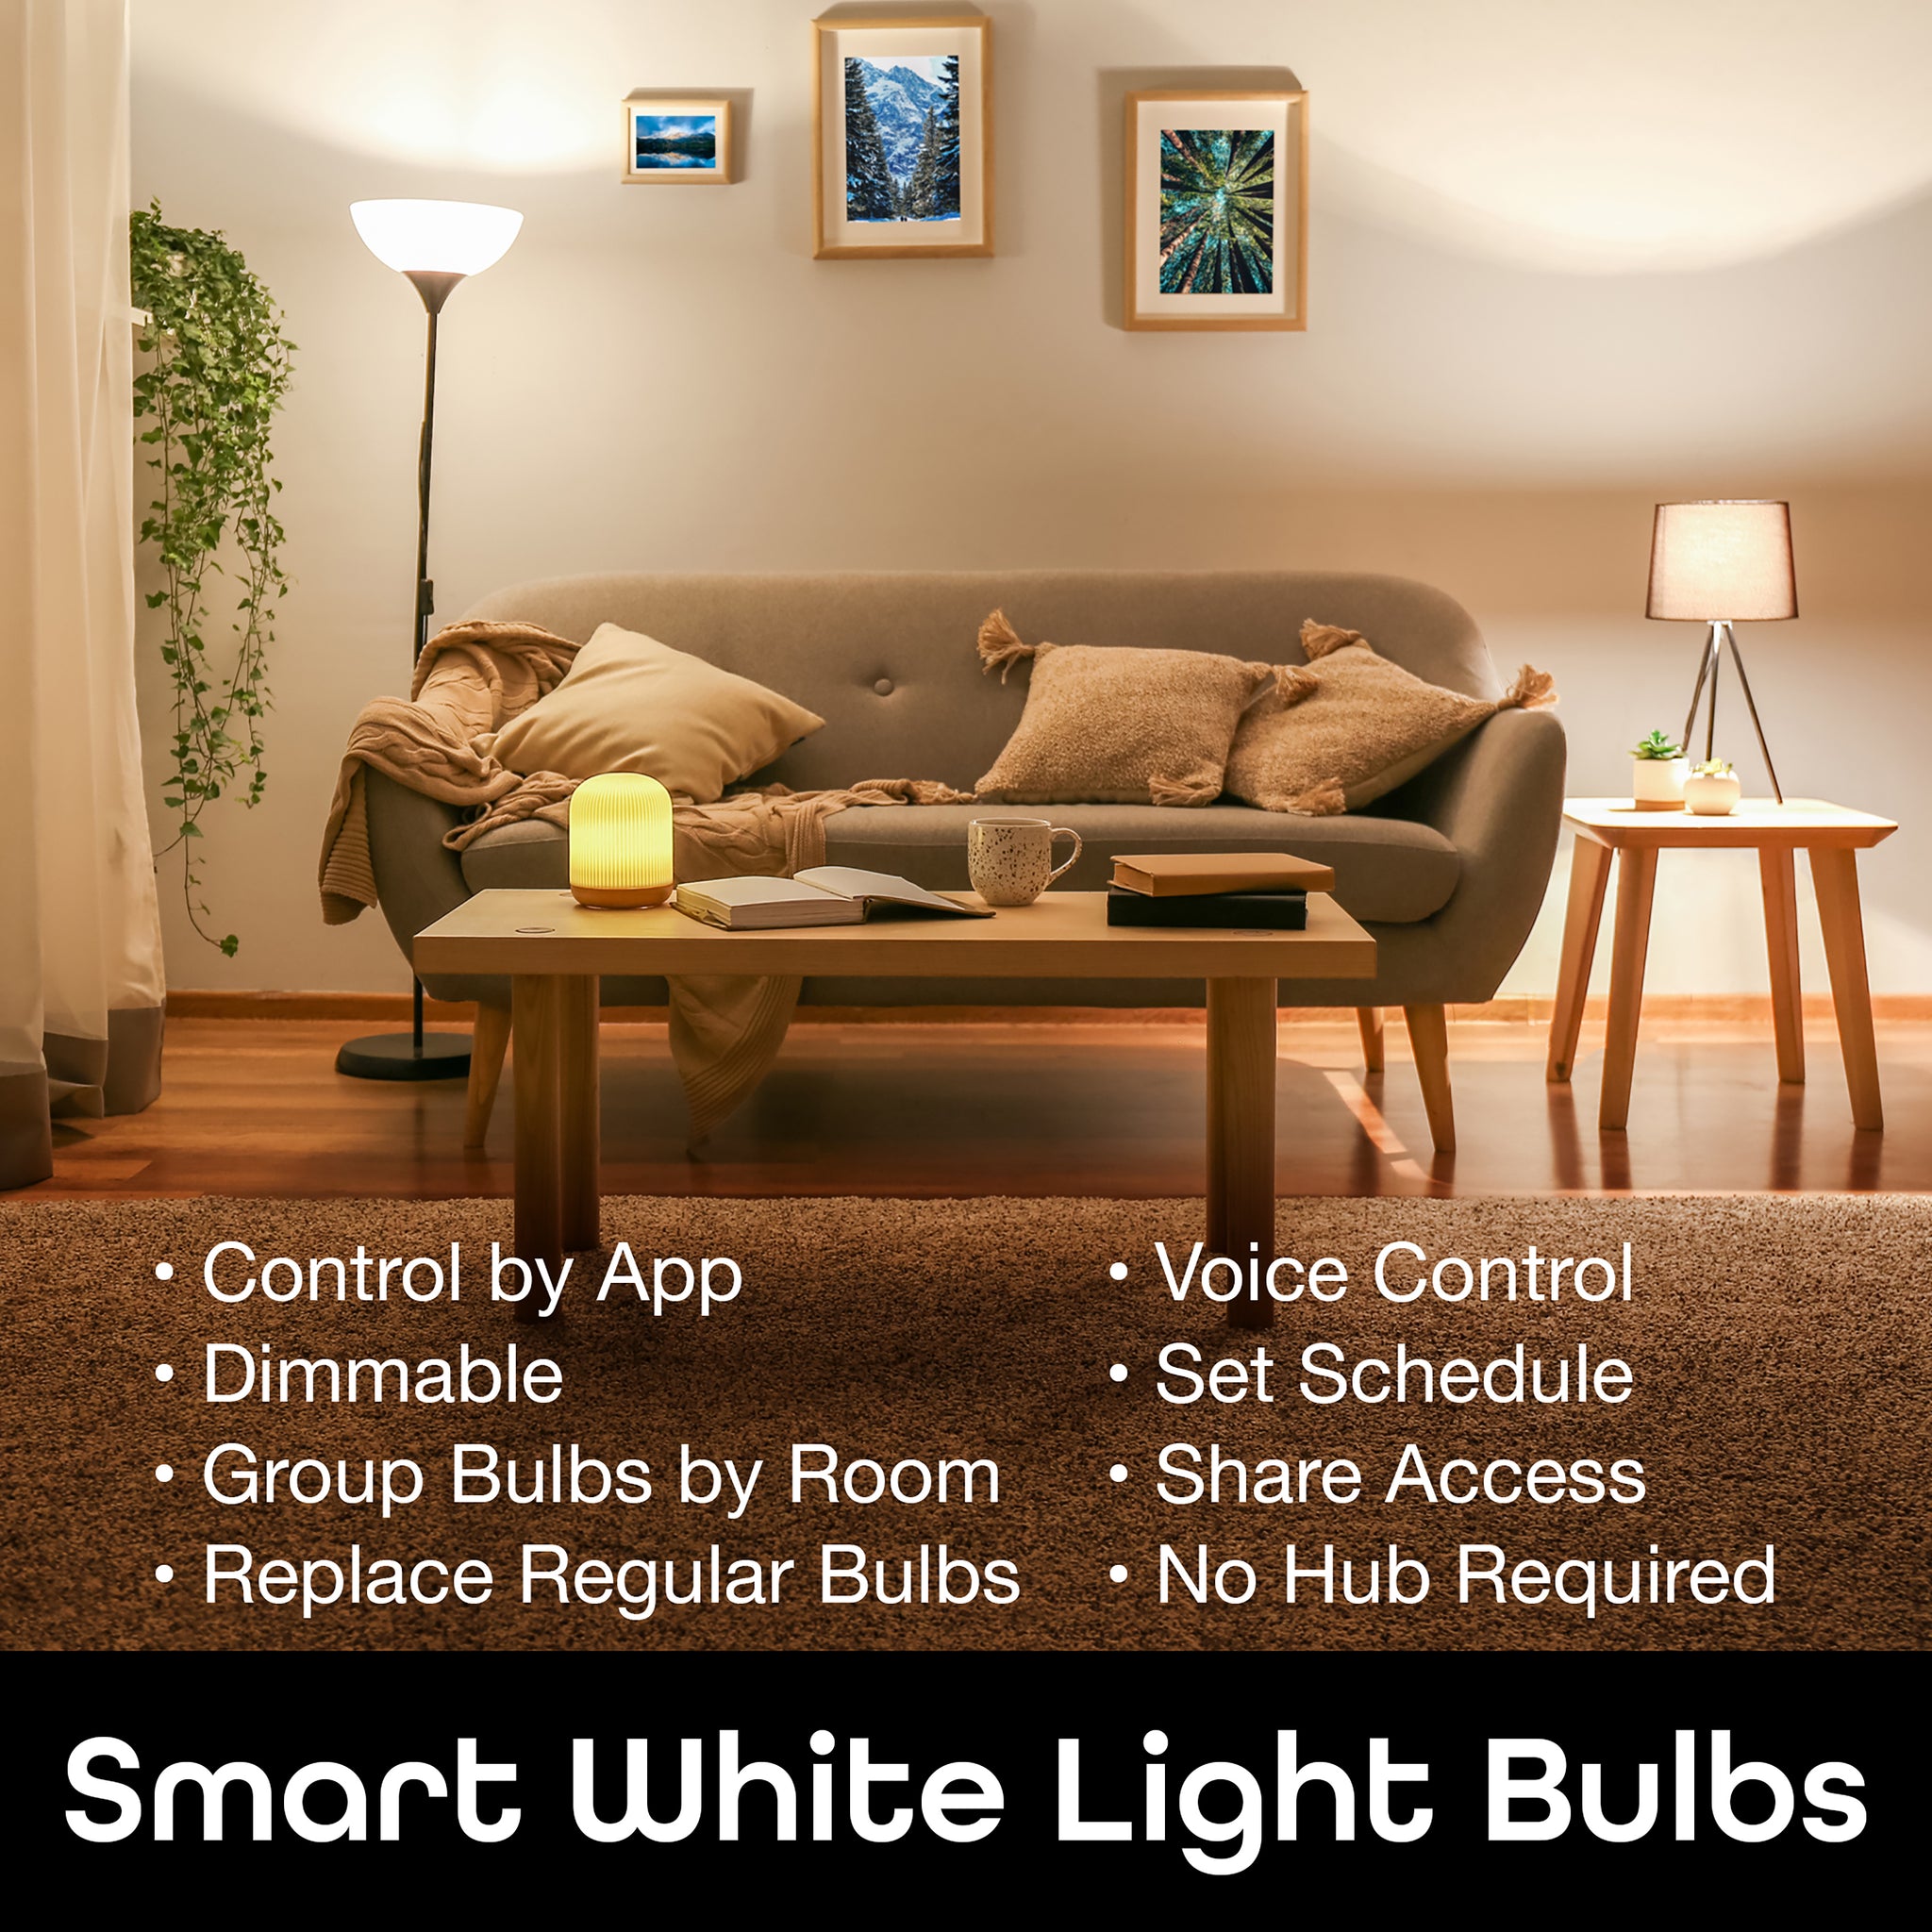 Geeni LUX 60W Equivalent Warm White Dimmable Smart LED Bul – Geeni Smarthome